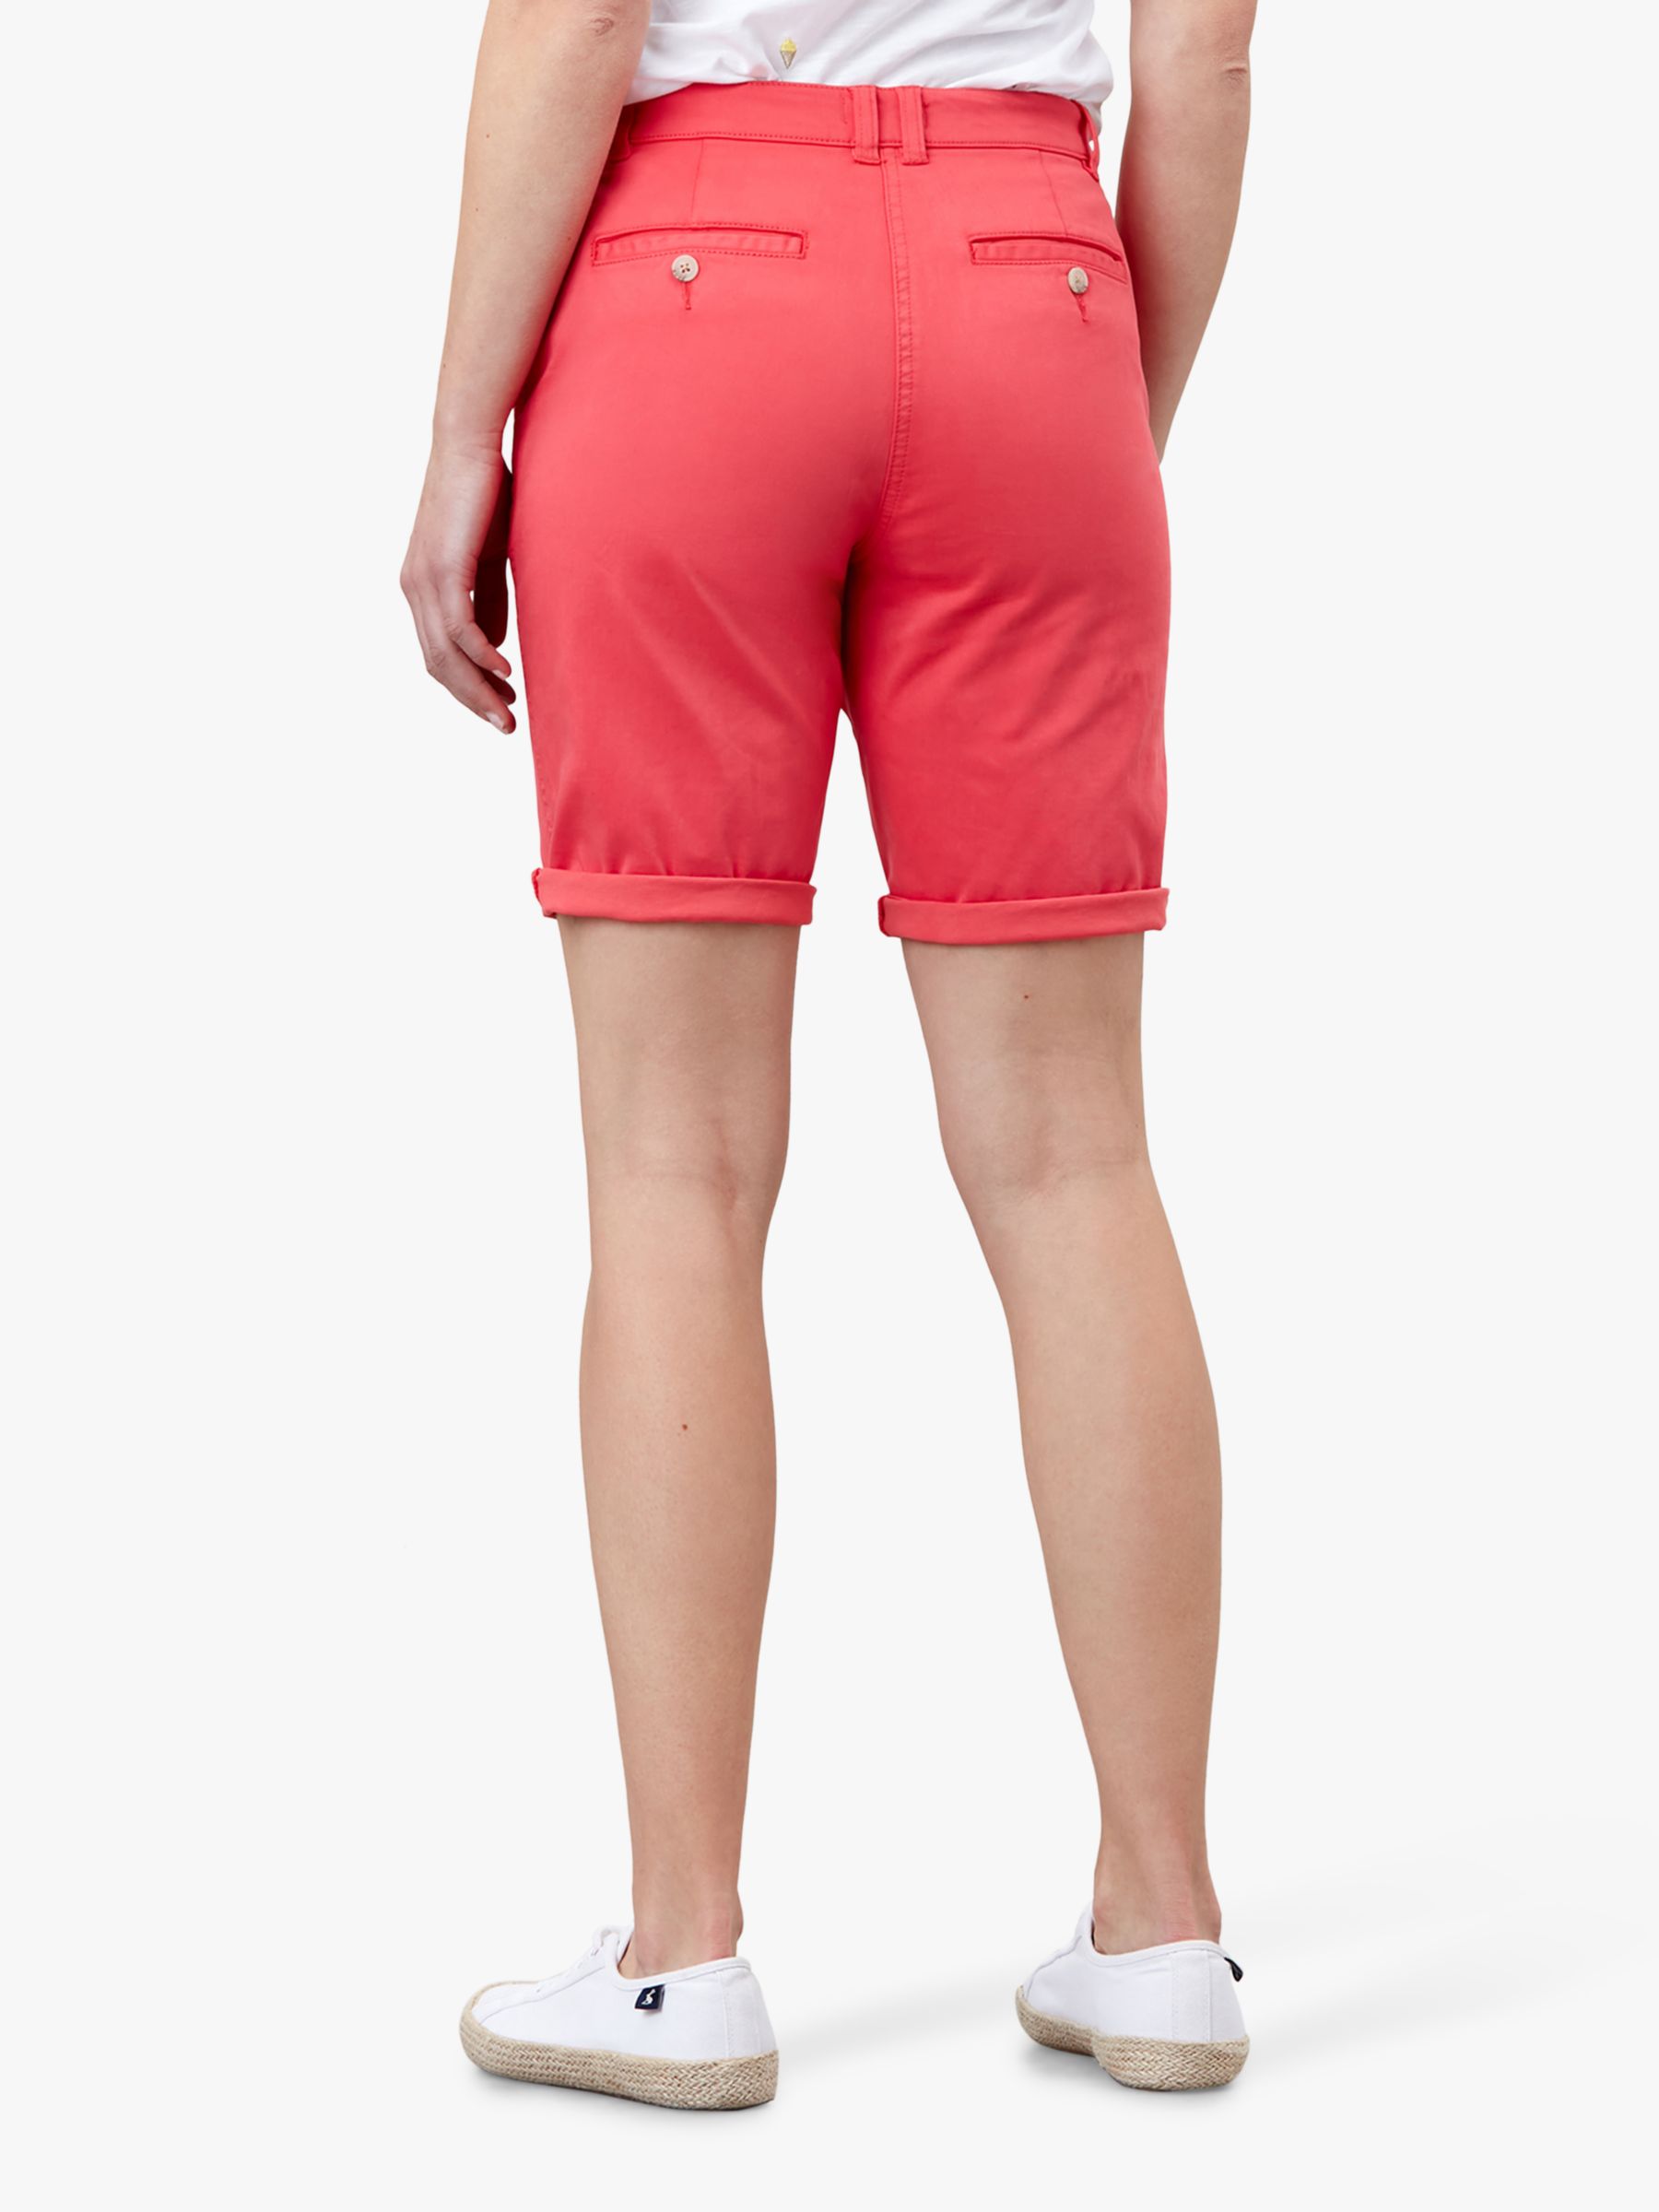 Joules Womens Cruise Long Chino Shorts in RED 